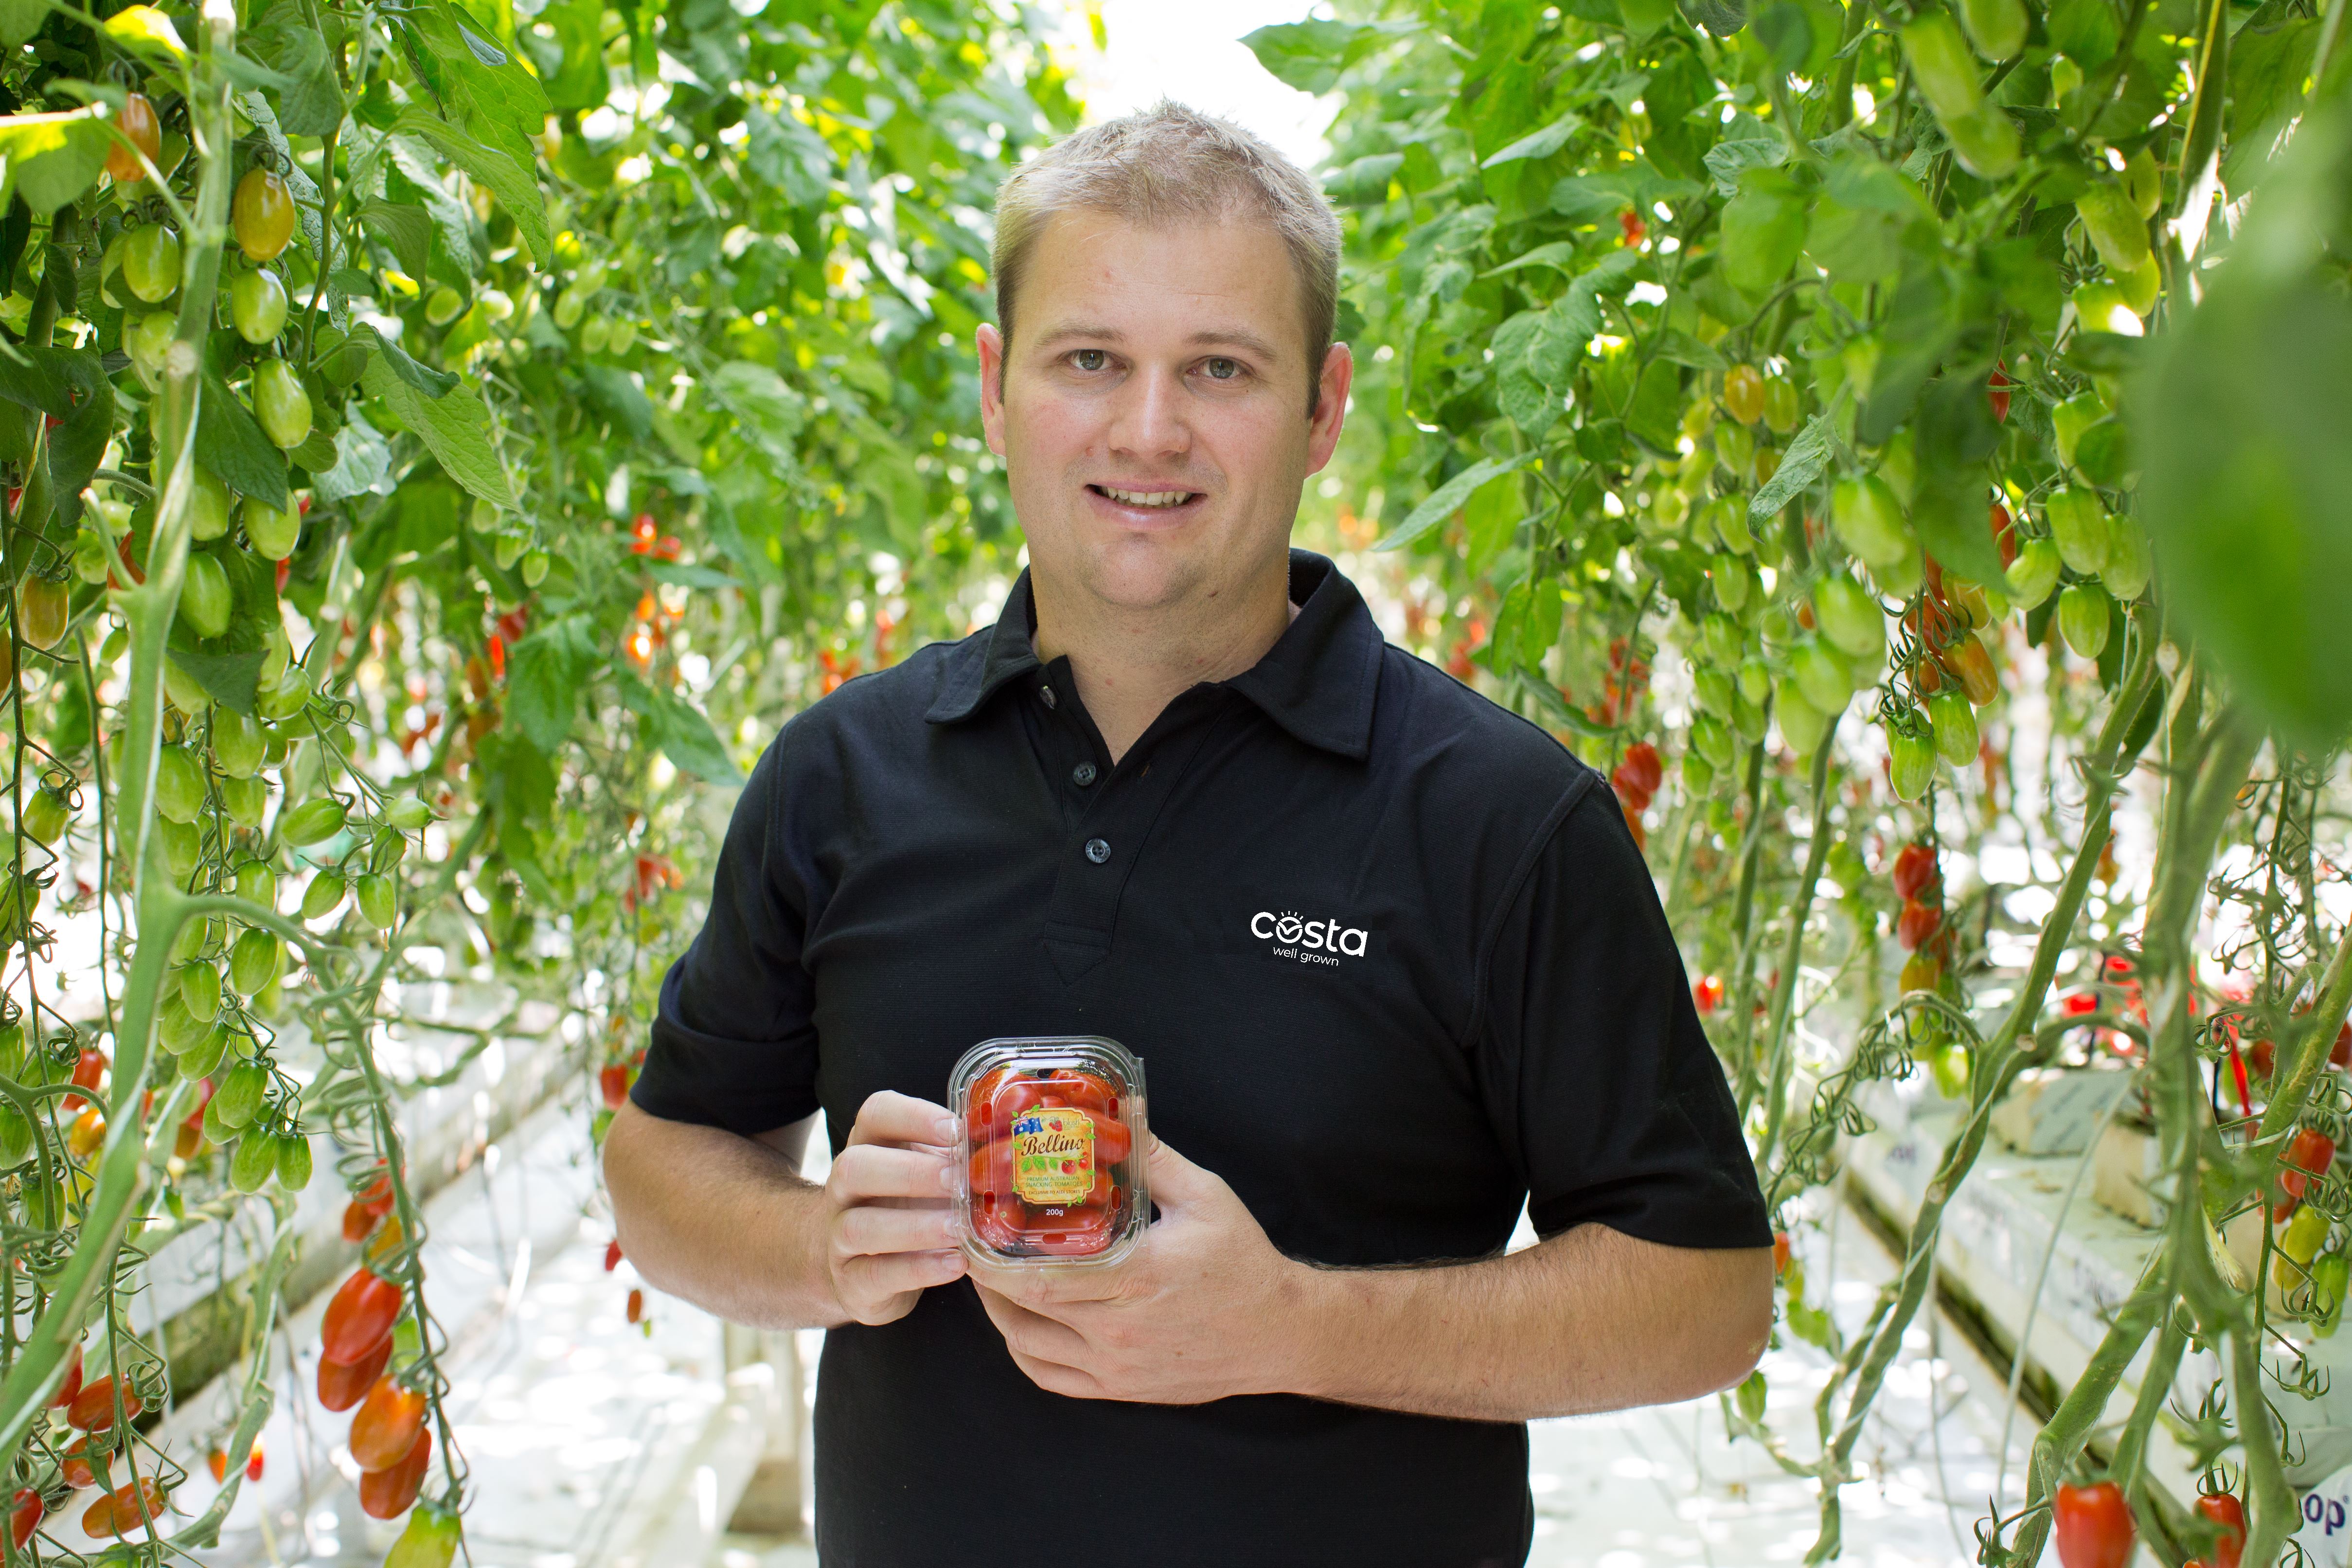 Hydroponic tomato grower Costa Group and scientists at UNE and WSU will explore microbial diversity in tomatoes’ root zones in a bid to find novel ways to combat disease in humid glasshouse environs.